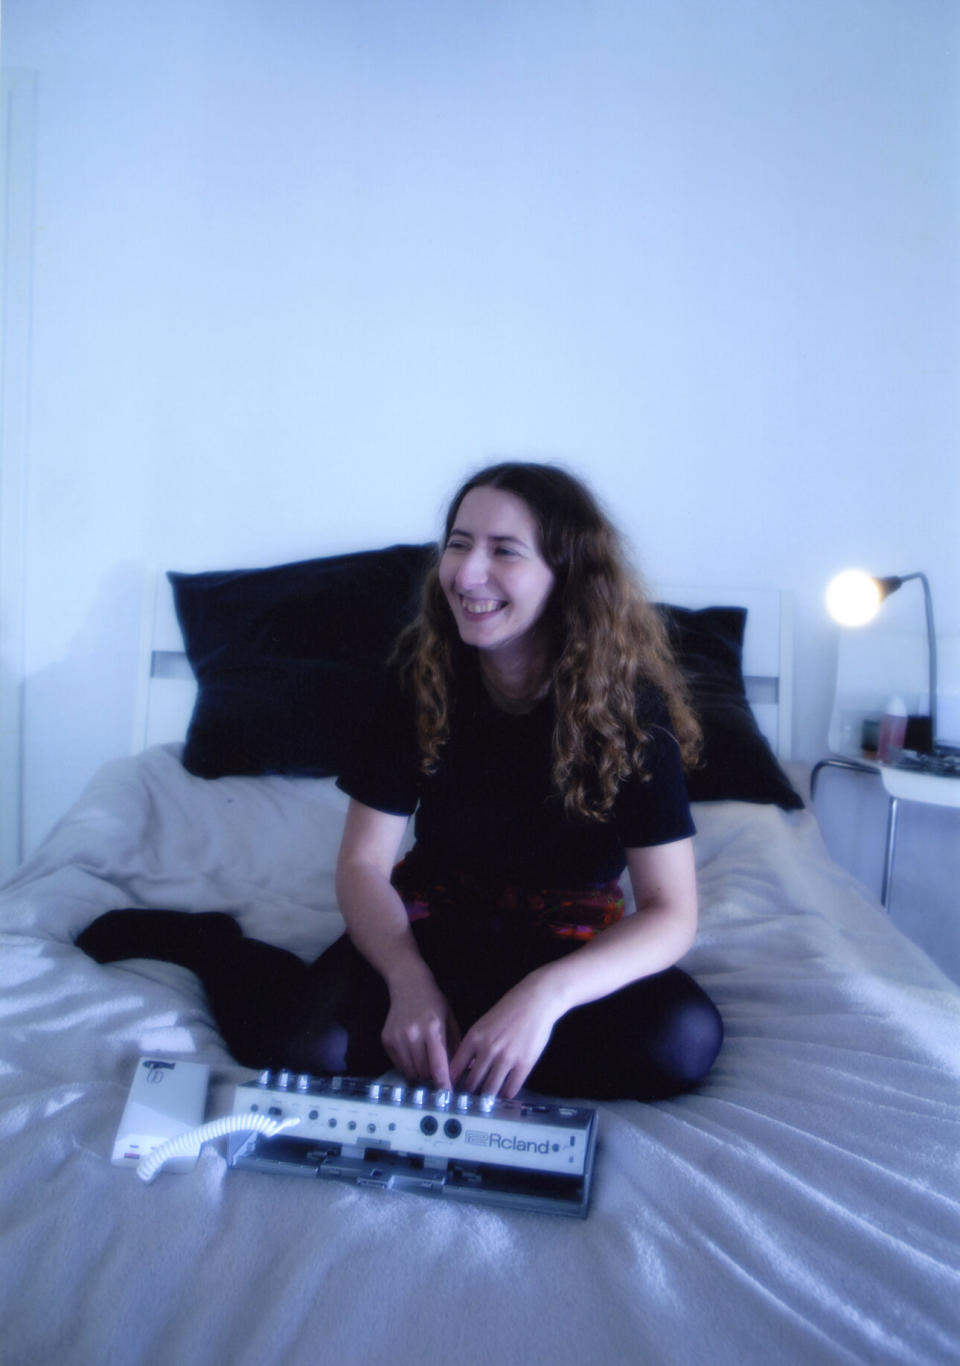 Poly Chain smiles as she fiddles around with a synthesizer (Photo credit: Nastya Platinova)